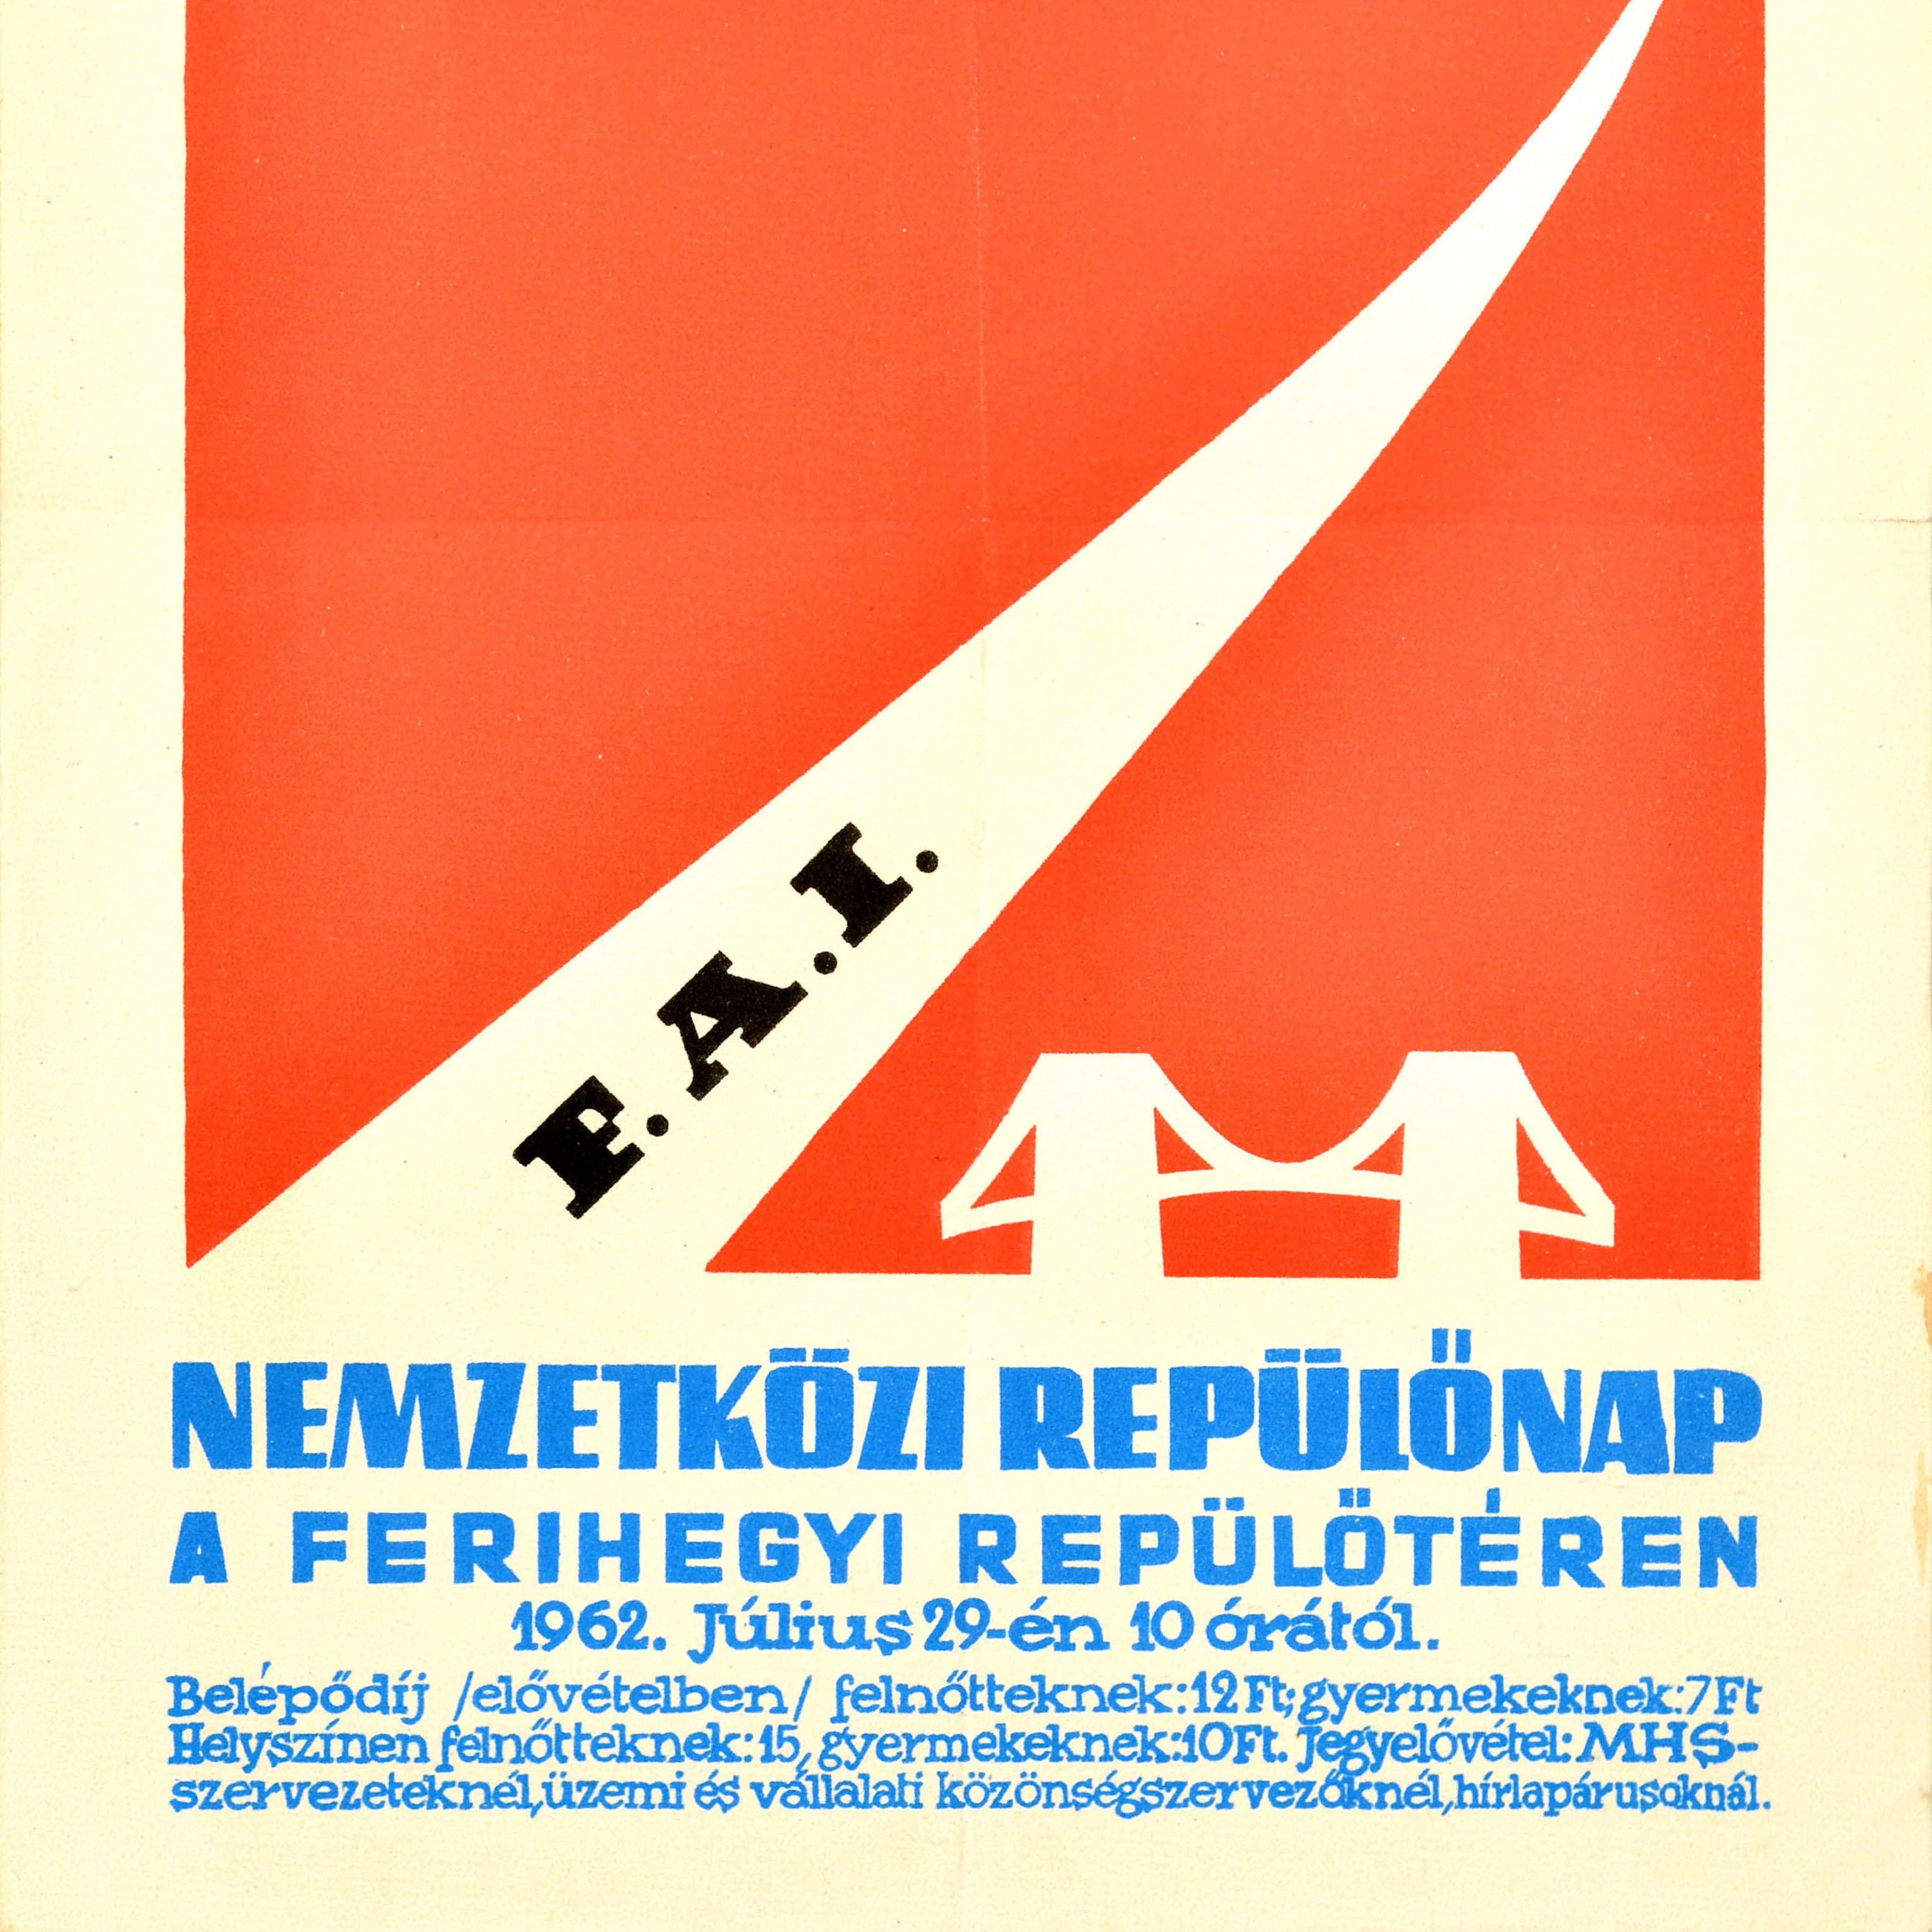 Original vintage advertising poster for the Kecskemet International Air Show / FAI Nemzetkozi Repulonap a Ferihegyi Repuloteren on 29 July 1962 featuring a colourful graphic design depicting a propeller plane flying in a curve above a bridge on a